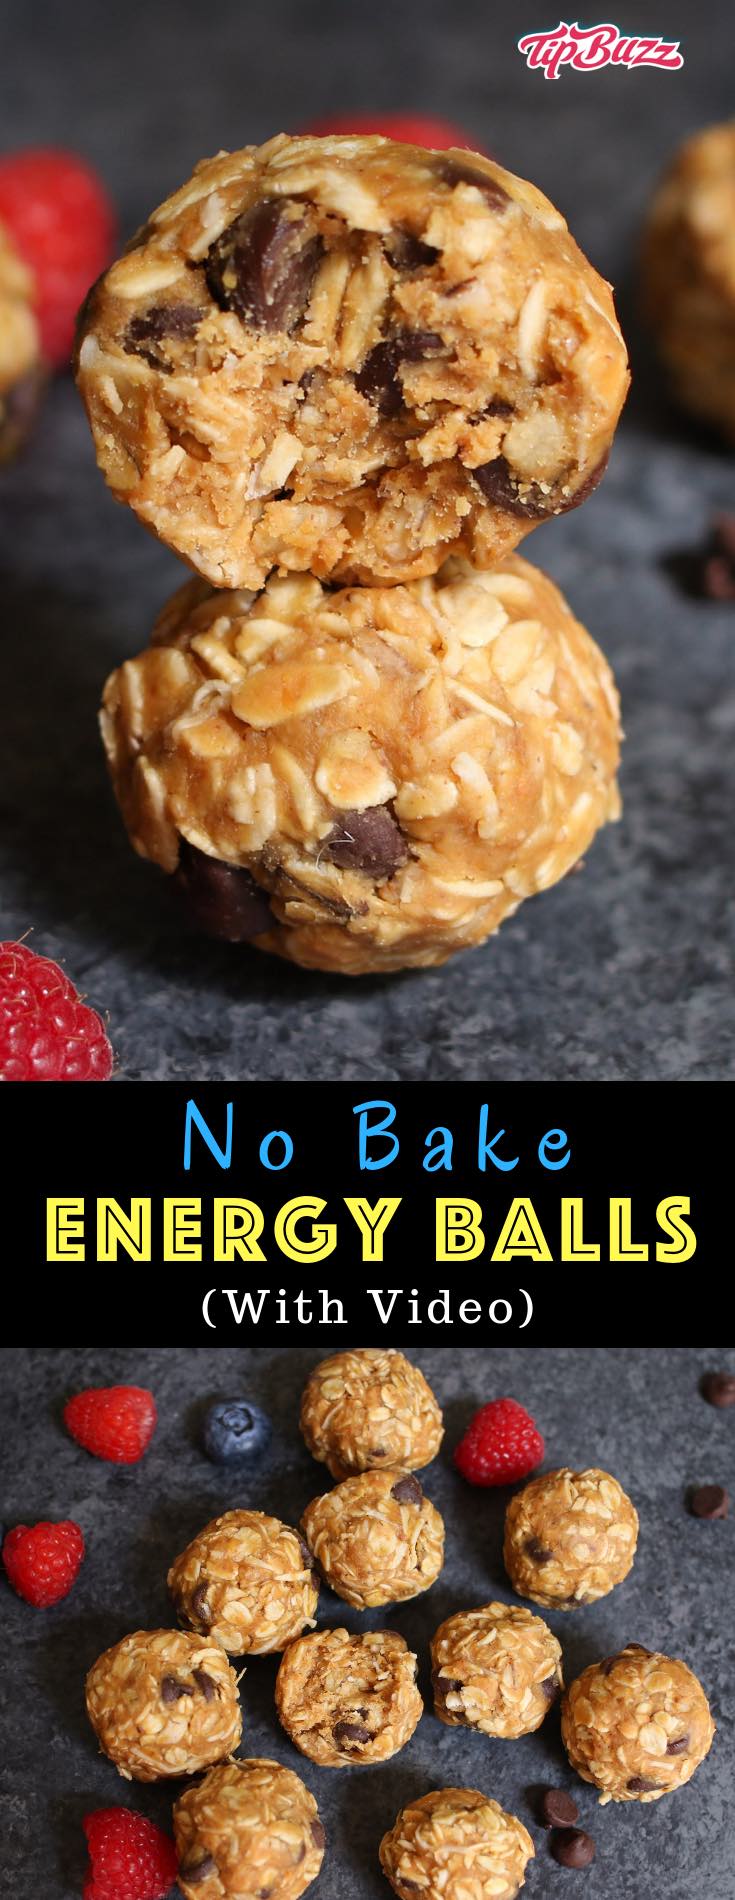 Delicious Energy Balls are an easy no bake vegan snack you can easily make in just 10 minutes using a mixing bowl.